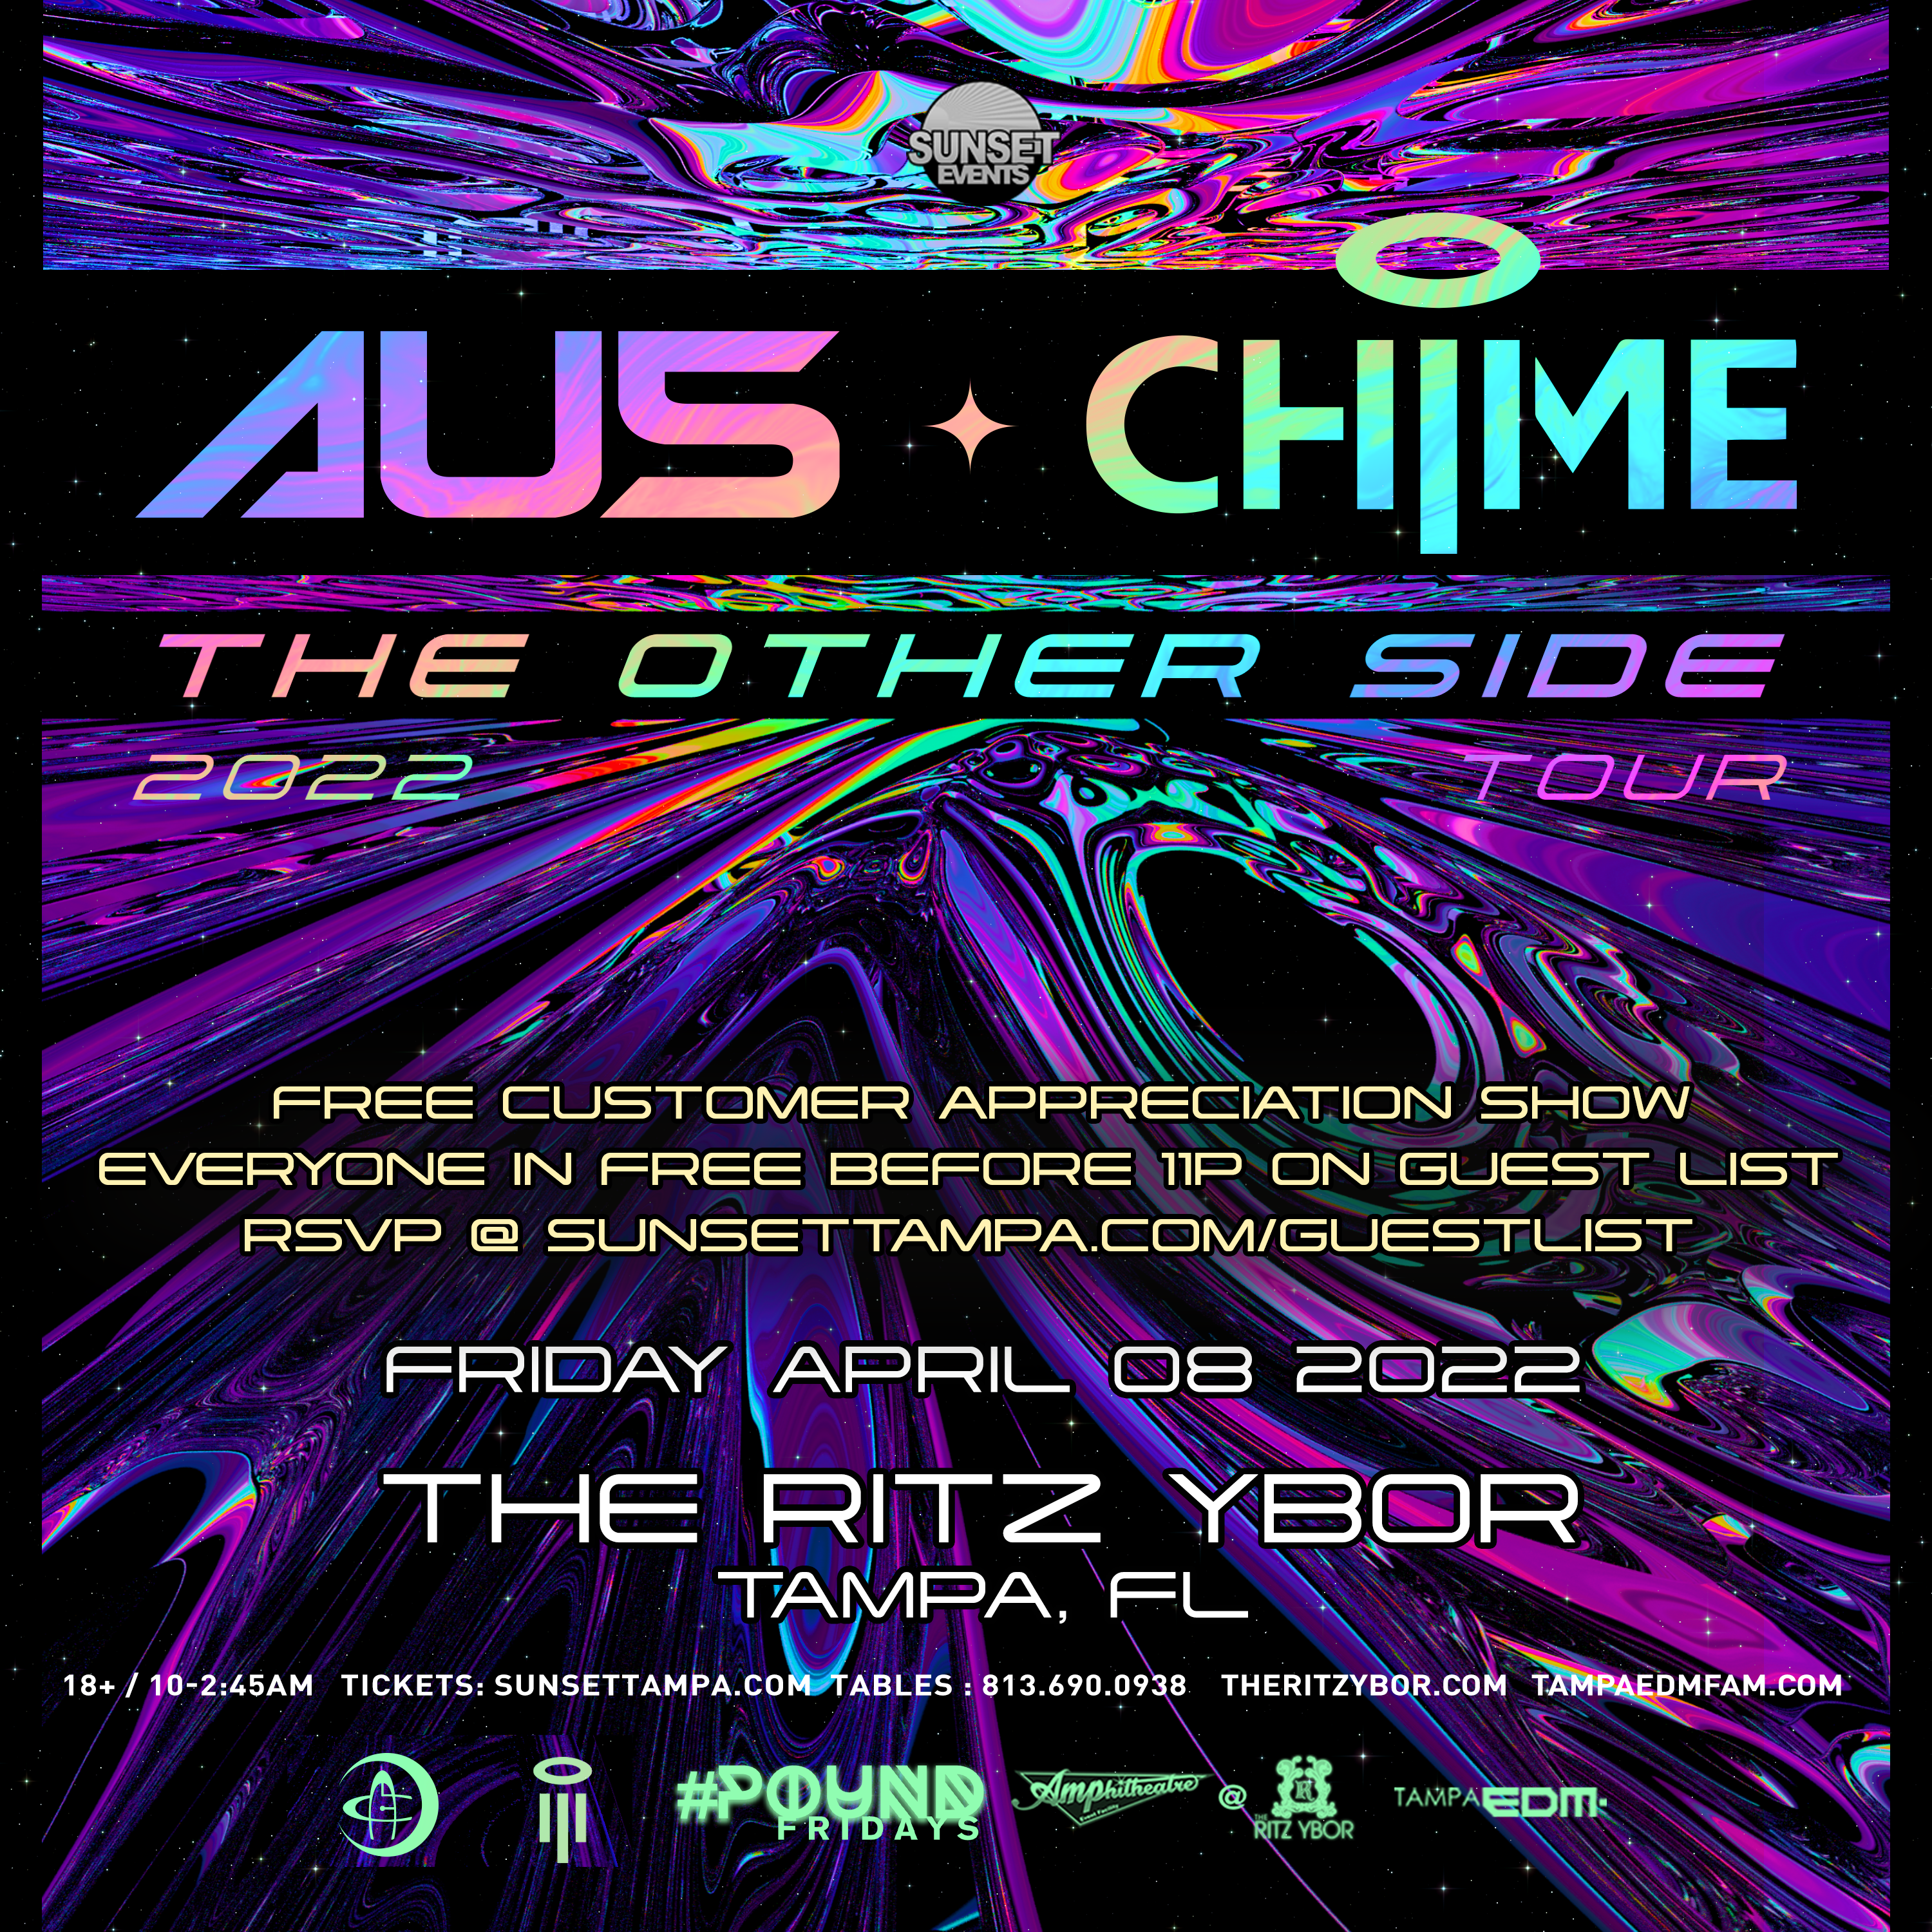 AU5 + CHIME - The Other Side 2022 Tour at The RITZ Ybor - 4/8/2022 